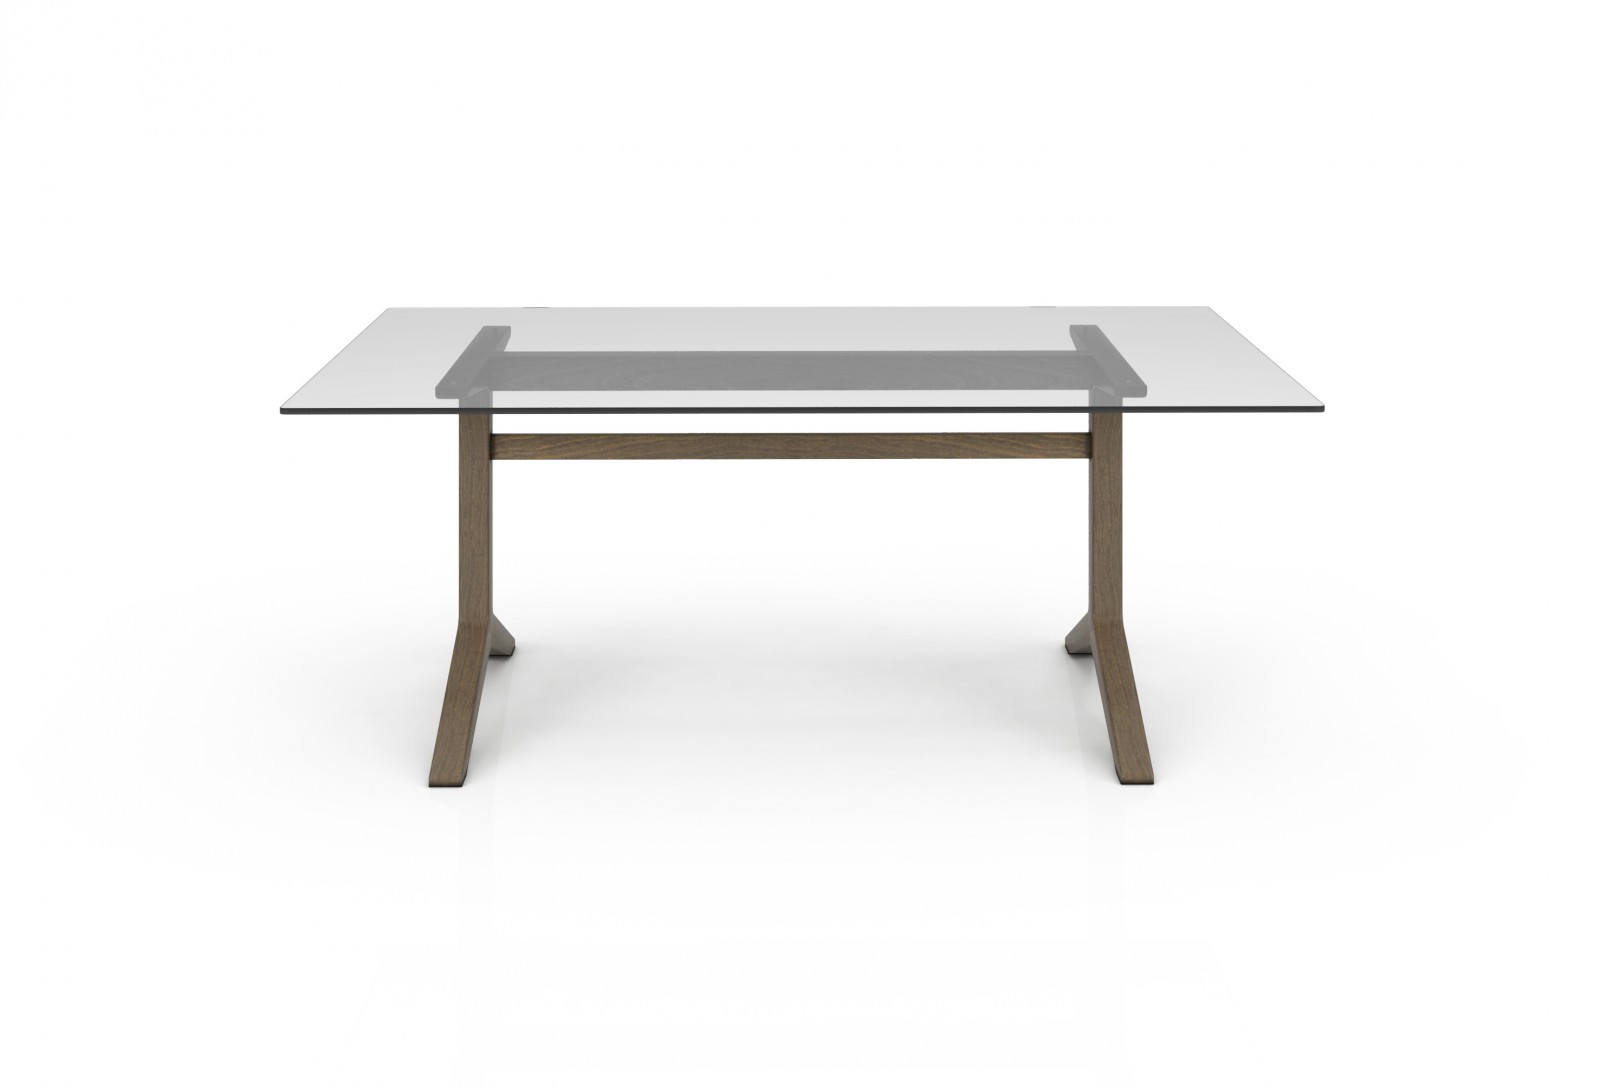 76" Glass top table